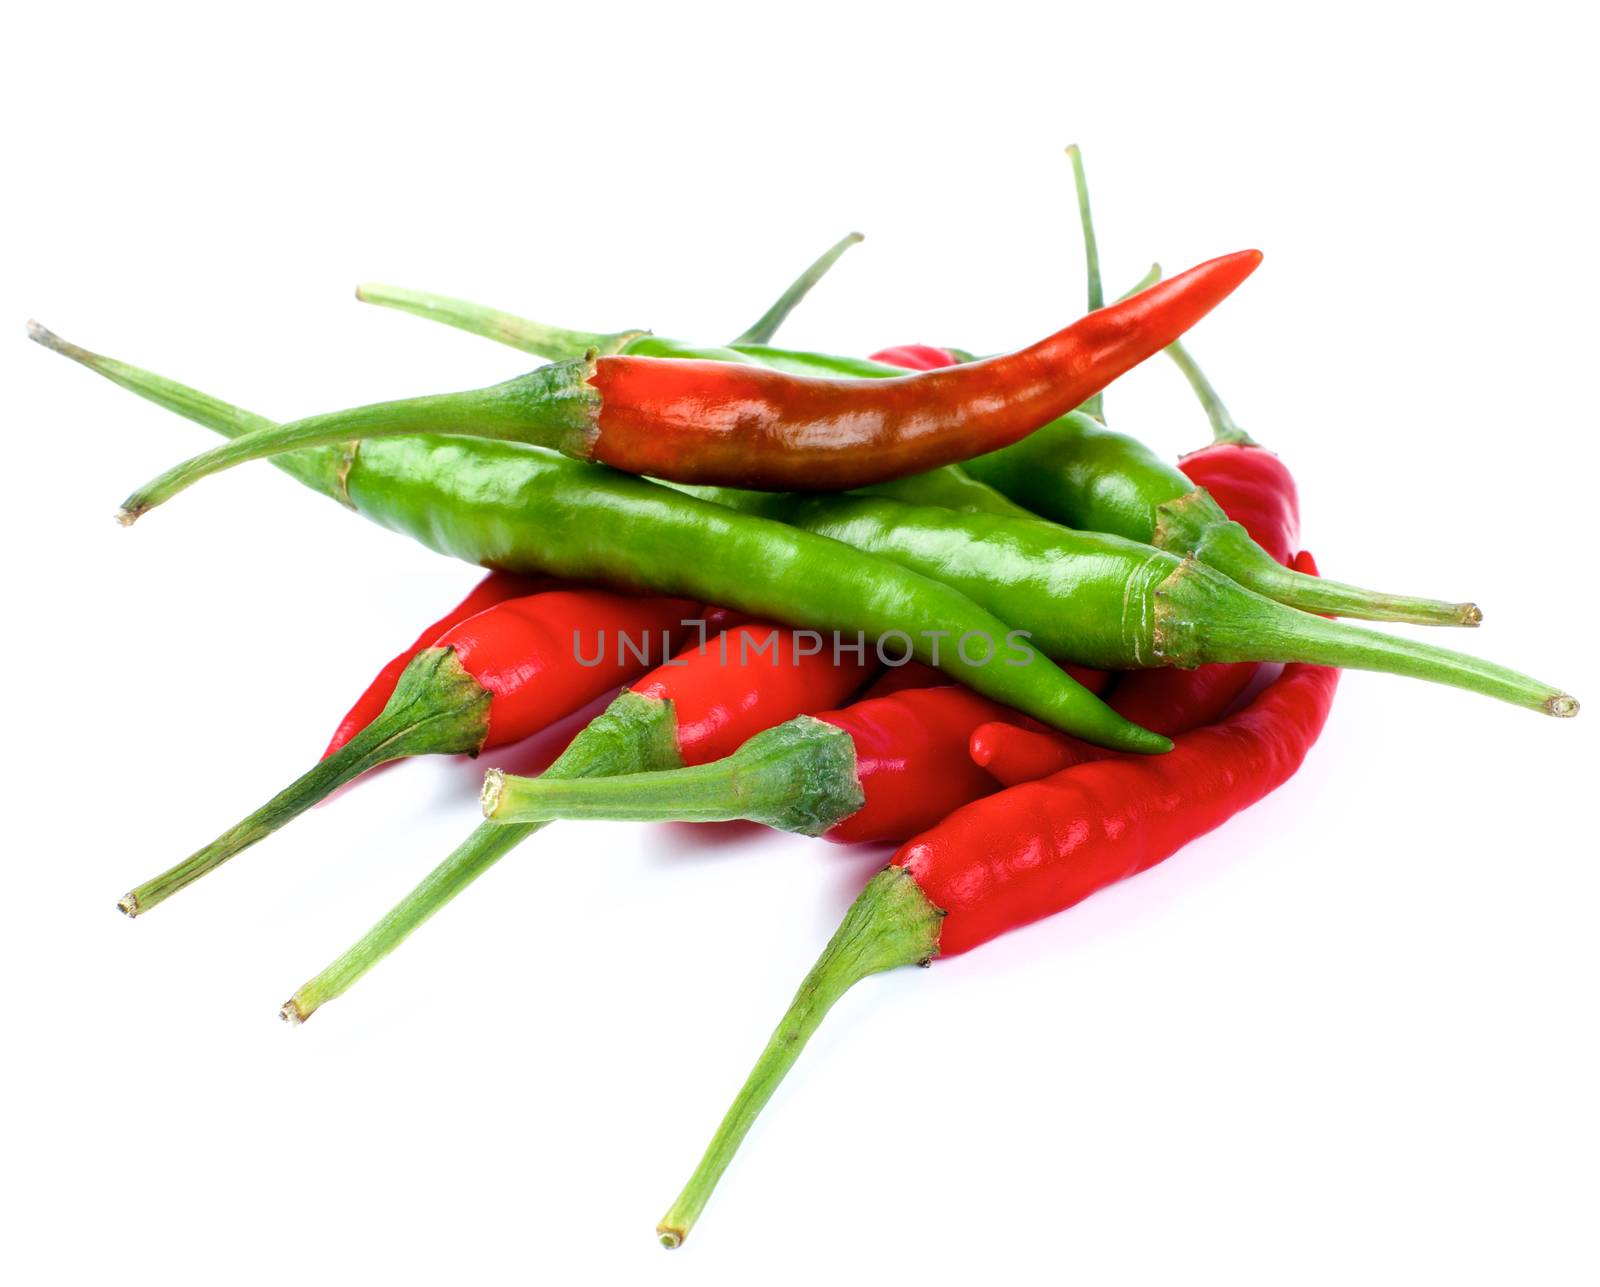 Arrangement of Chili Peppers by zhekos